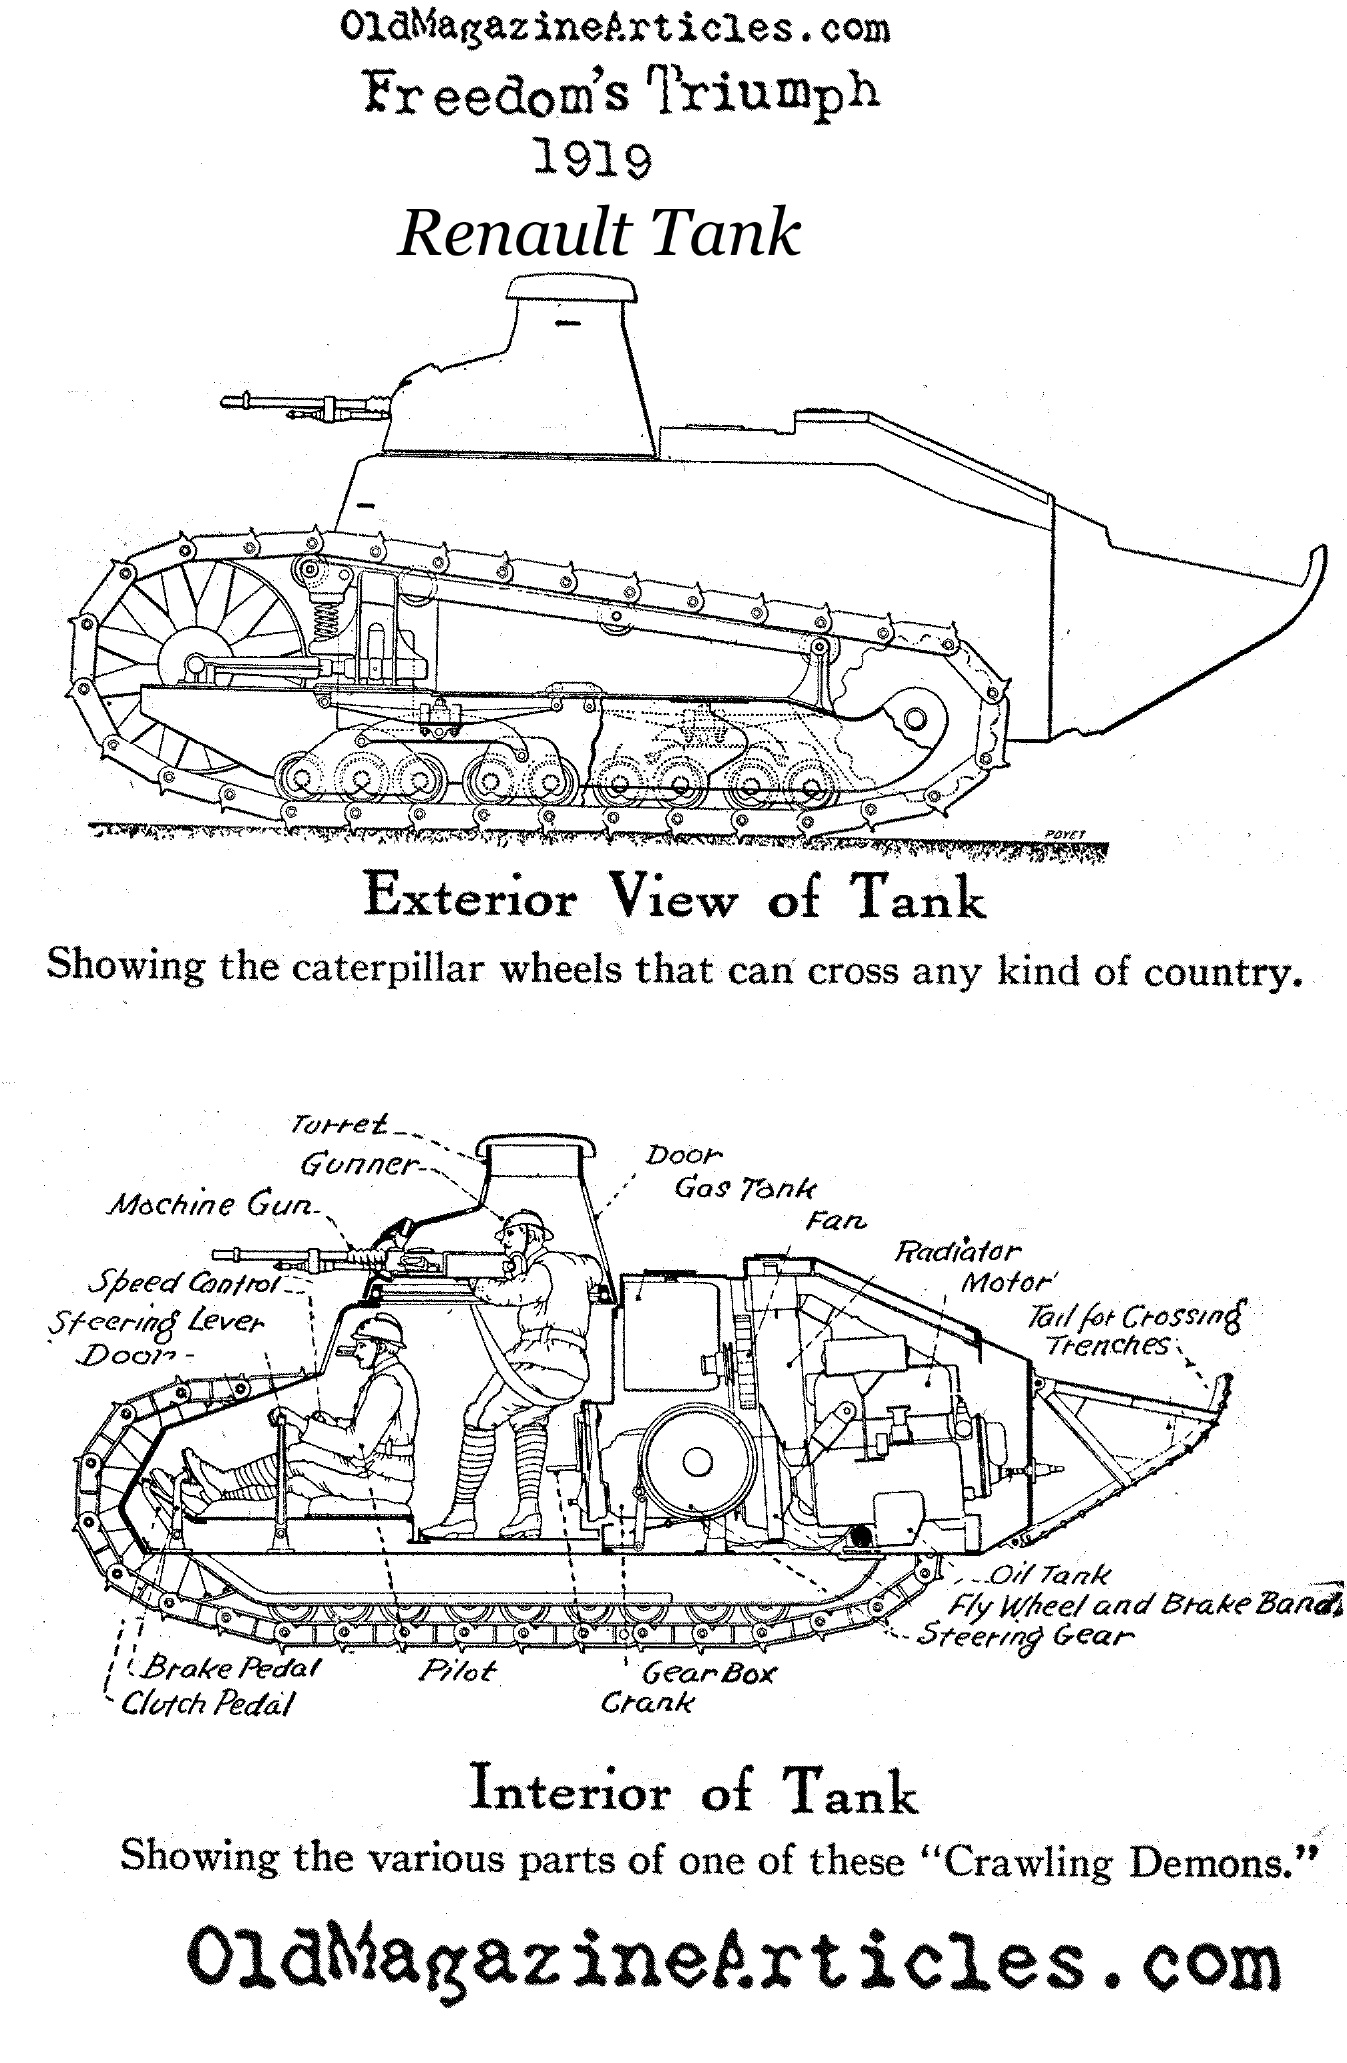 A Diagram of the French Renault Tank (Freedom's Triumph, 1919)